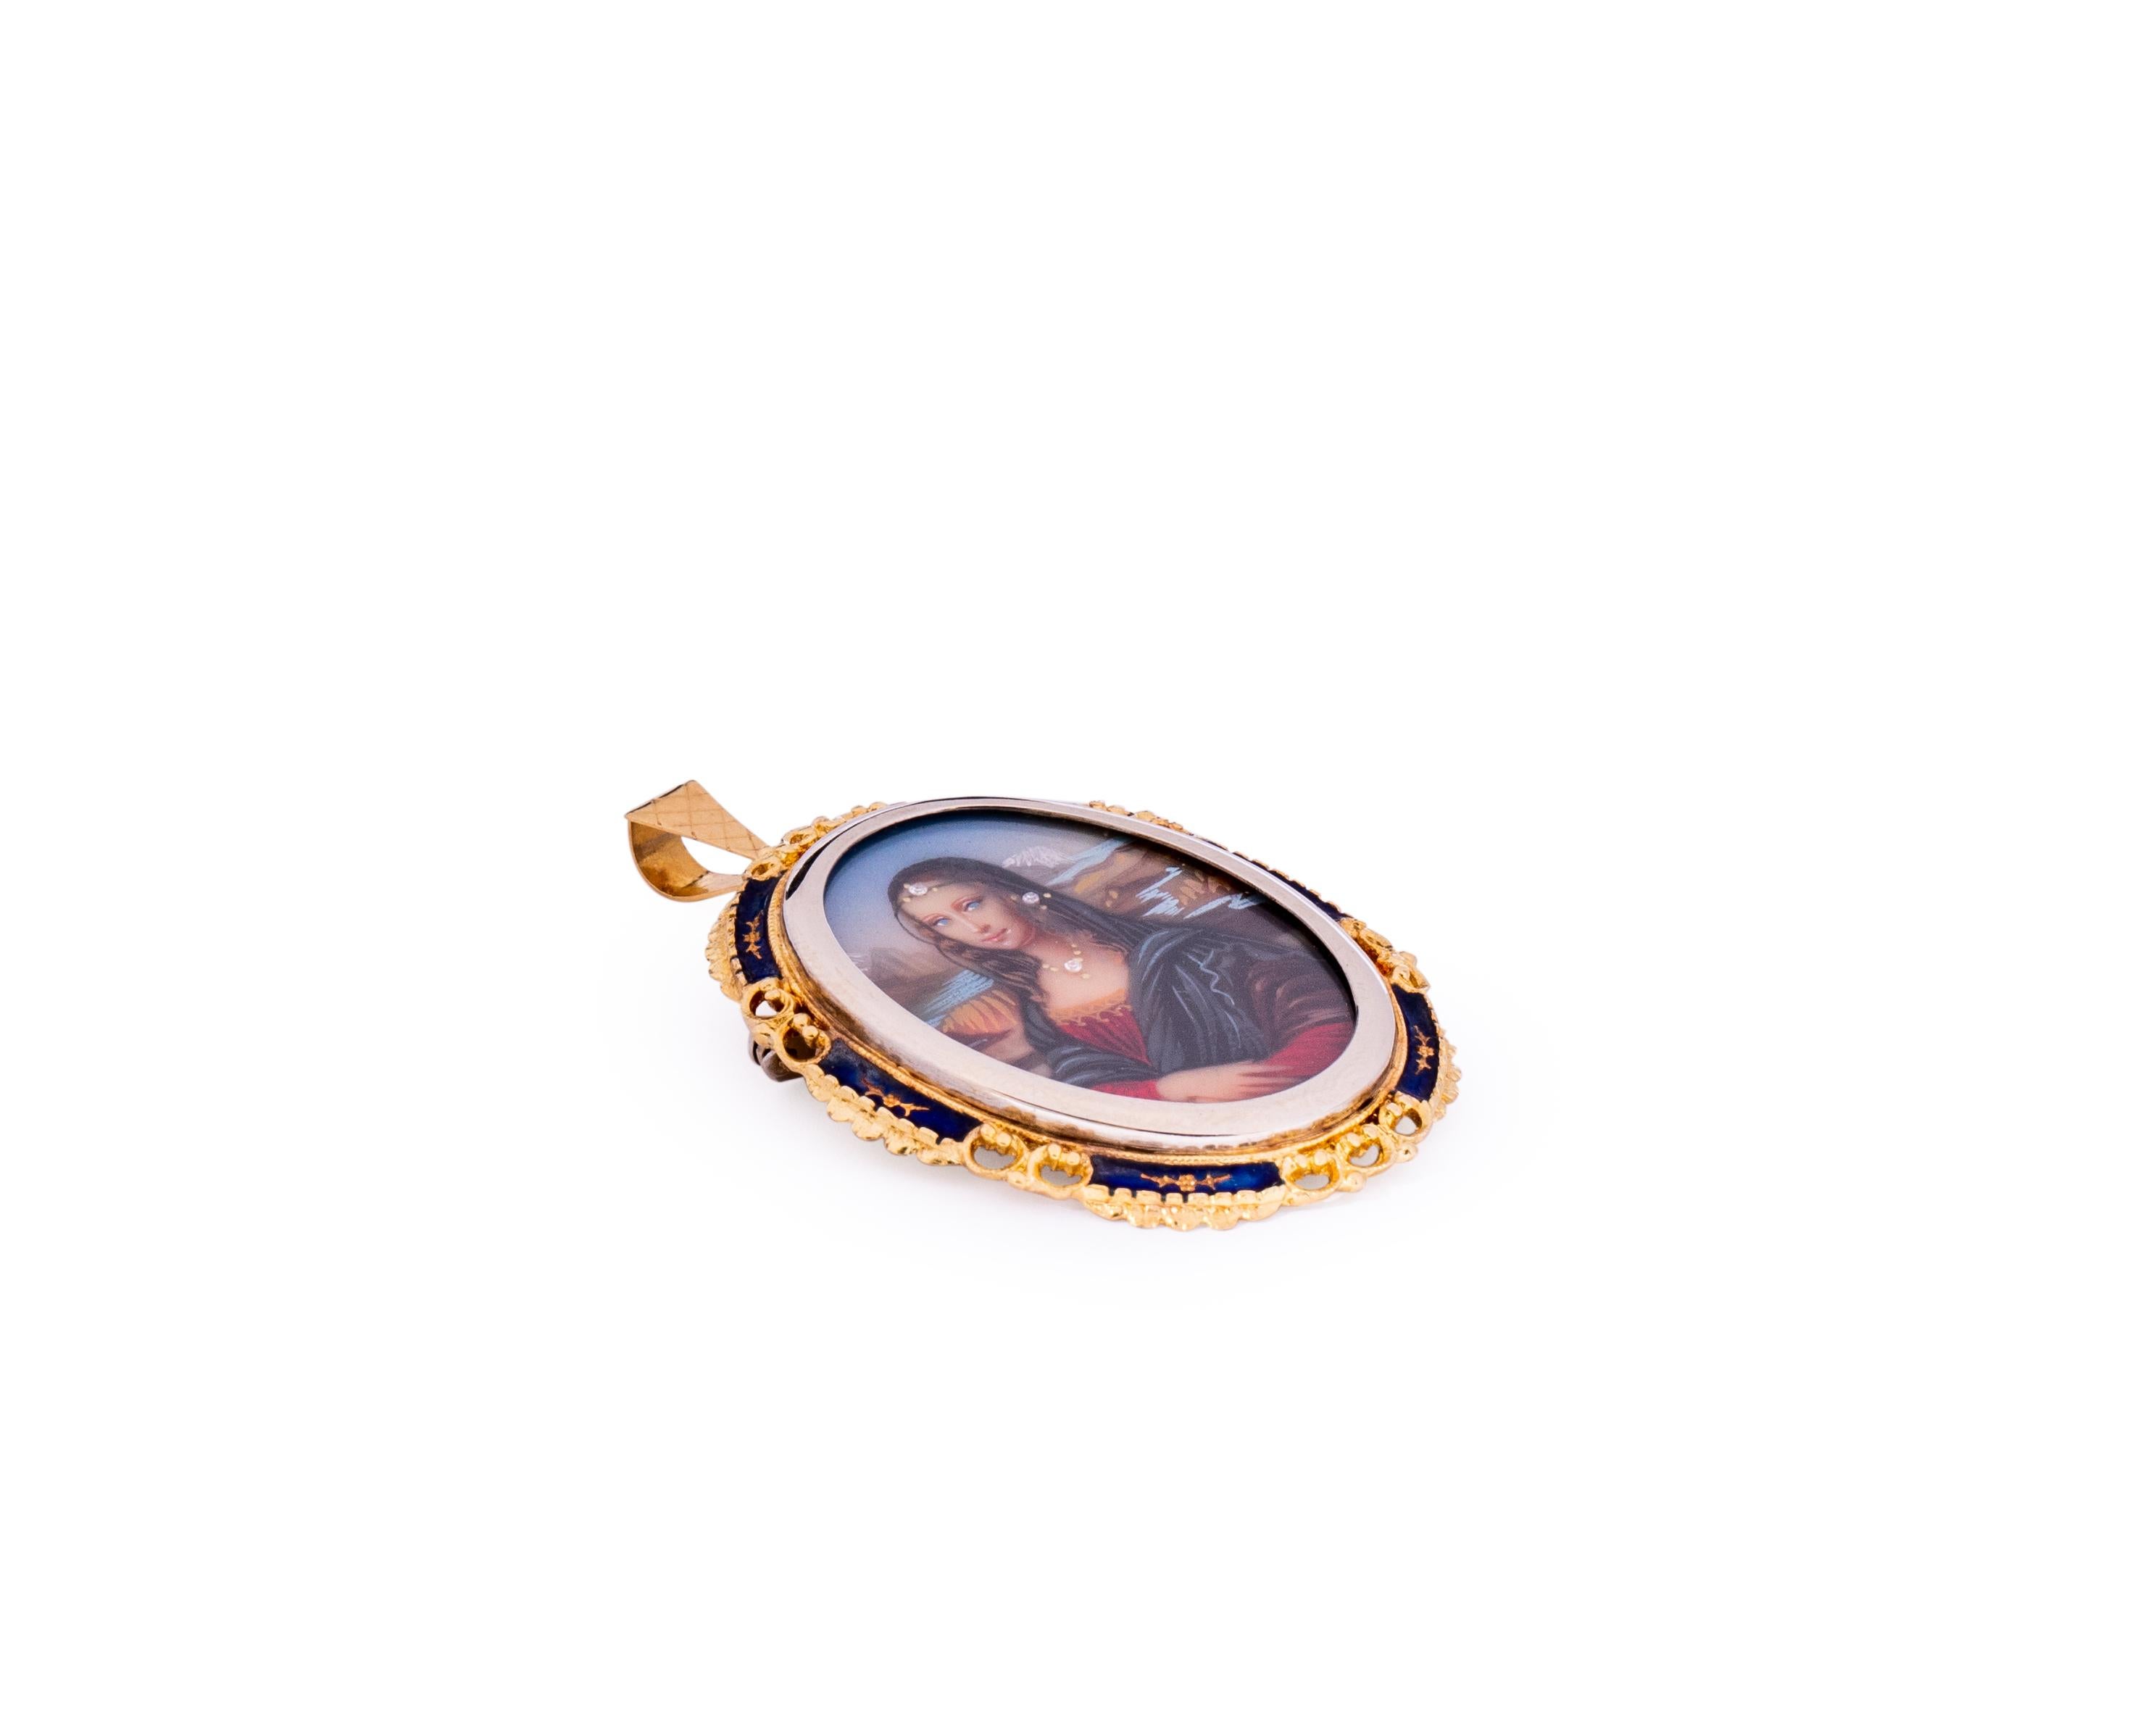 Item Details:
Metal type: 18 Karat Yellow Gold
Weight: 9.2 grams
Measurements: 2 inch length x 1 inch width

Features:
Hand Painted Portrait 
Blue Enamel Border
Crafted in 18 Karat Yellow Gold
Made in Italy
Can be worn as Pendant or Brooch 

